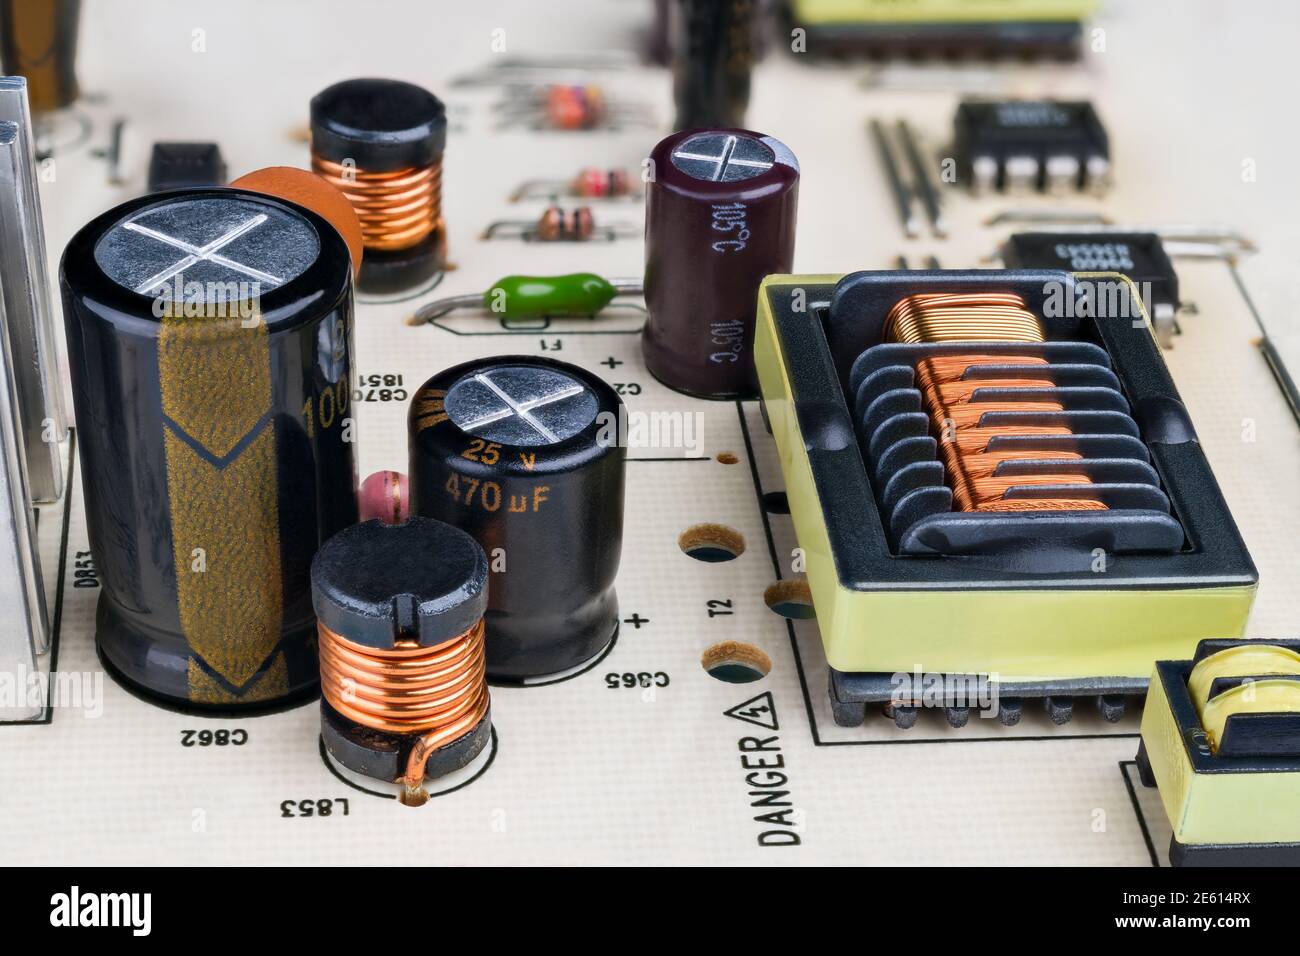 Electronic components on printed circuit board detail. Closeup of capacitors, inductors and rectangular transformer with protruding insulation grooves. Stock Photo